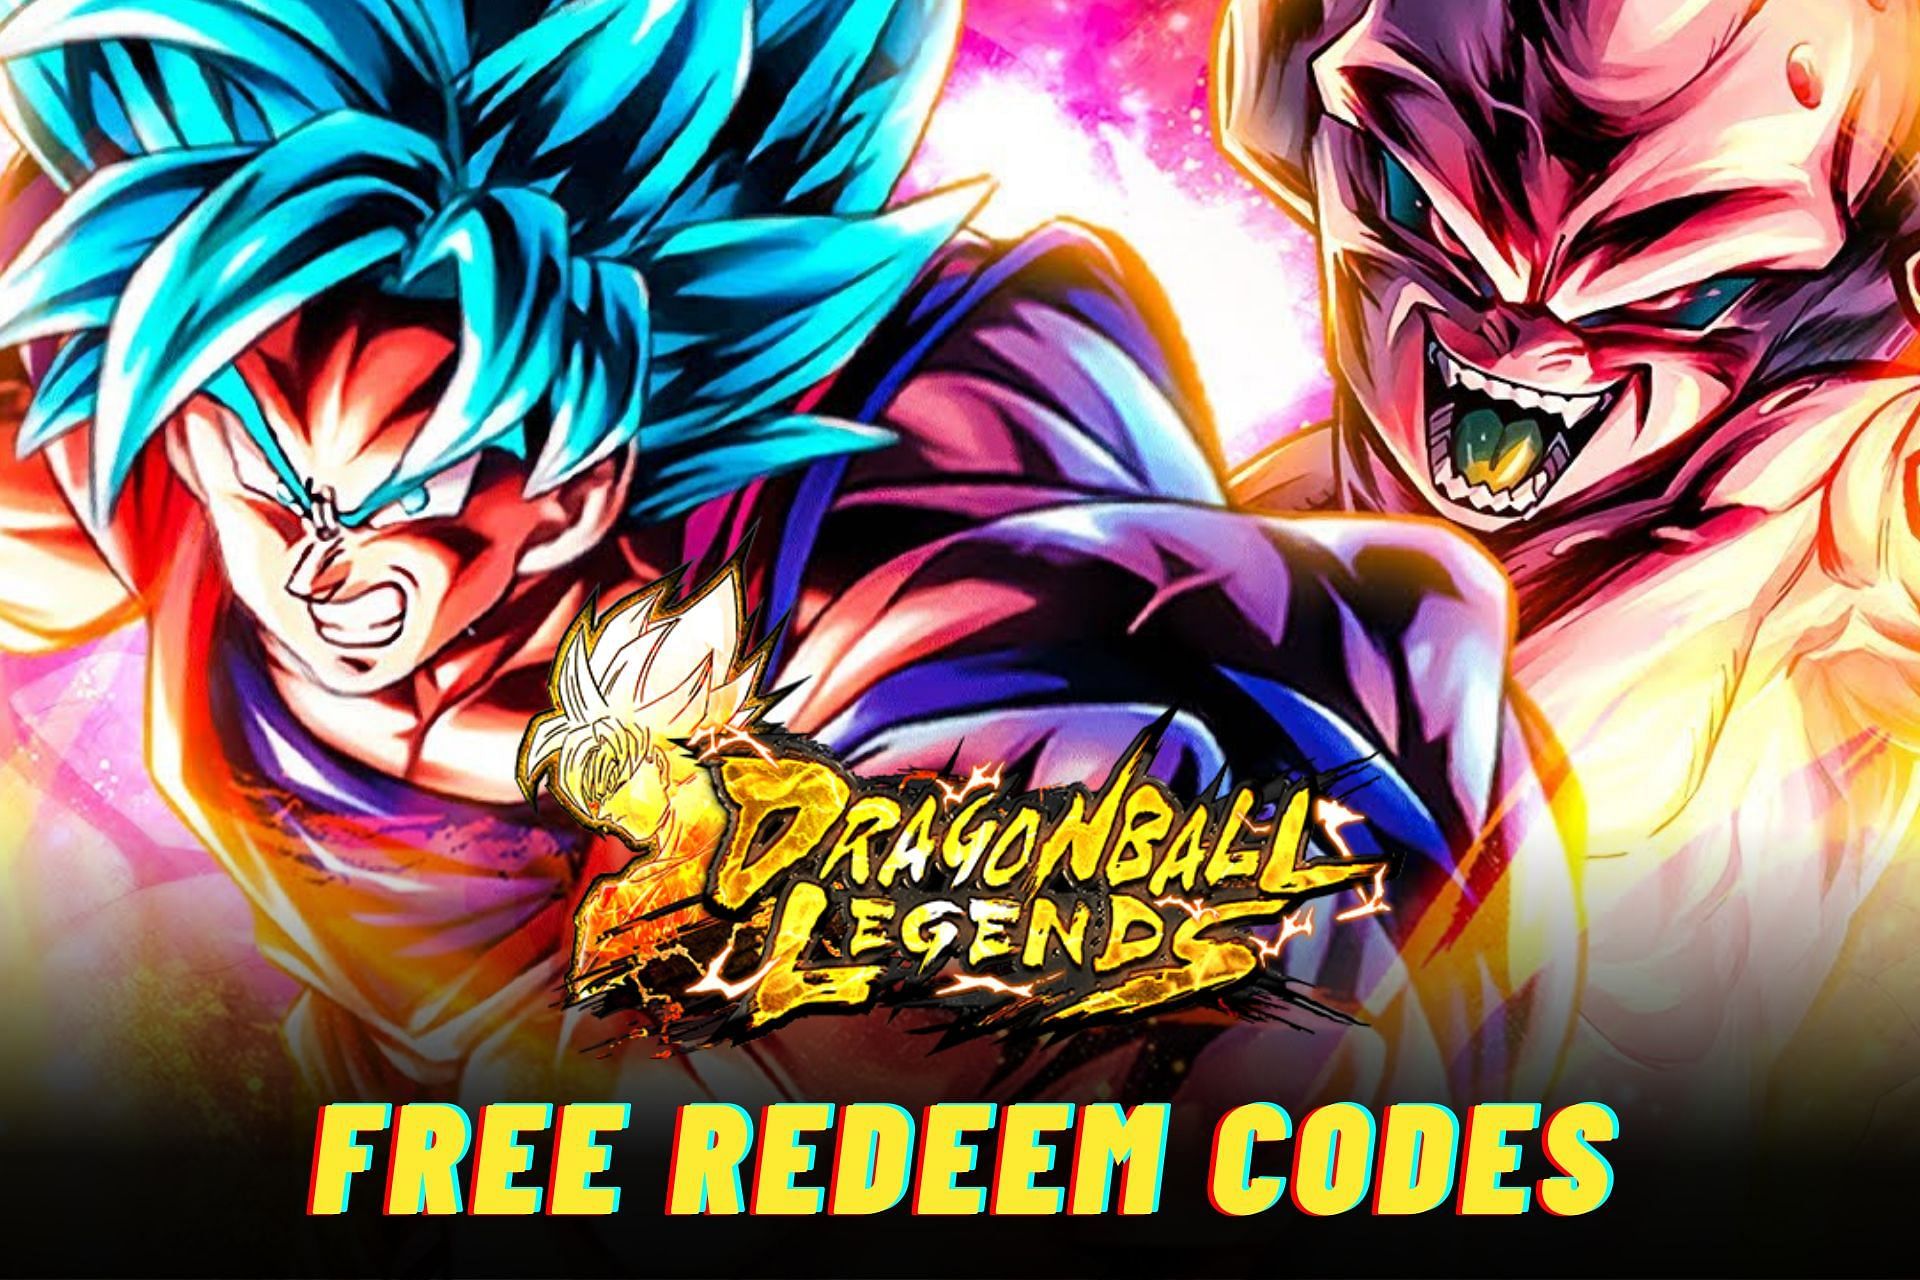 7 best ways to earn Chrono Crystals in Dragon Ball Legends (2022)